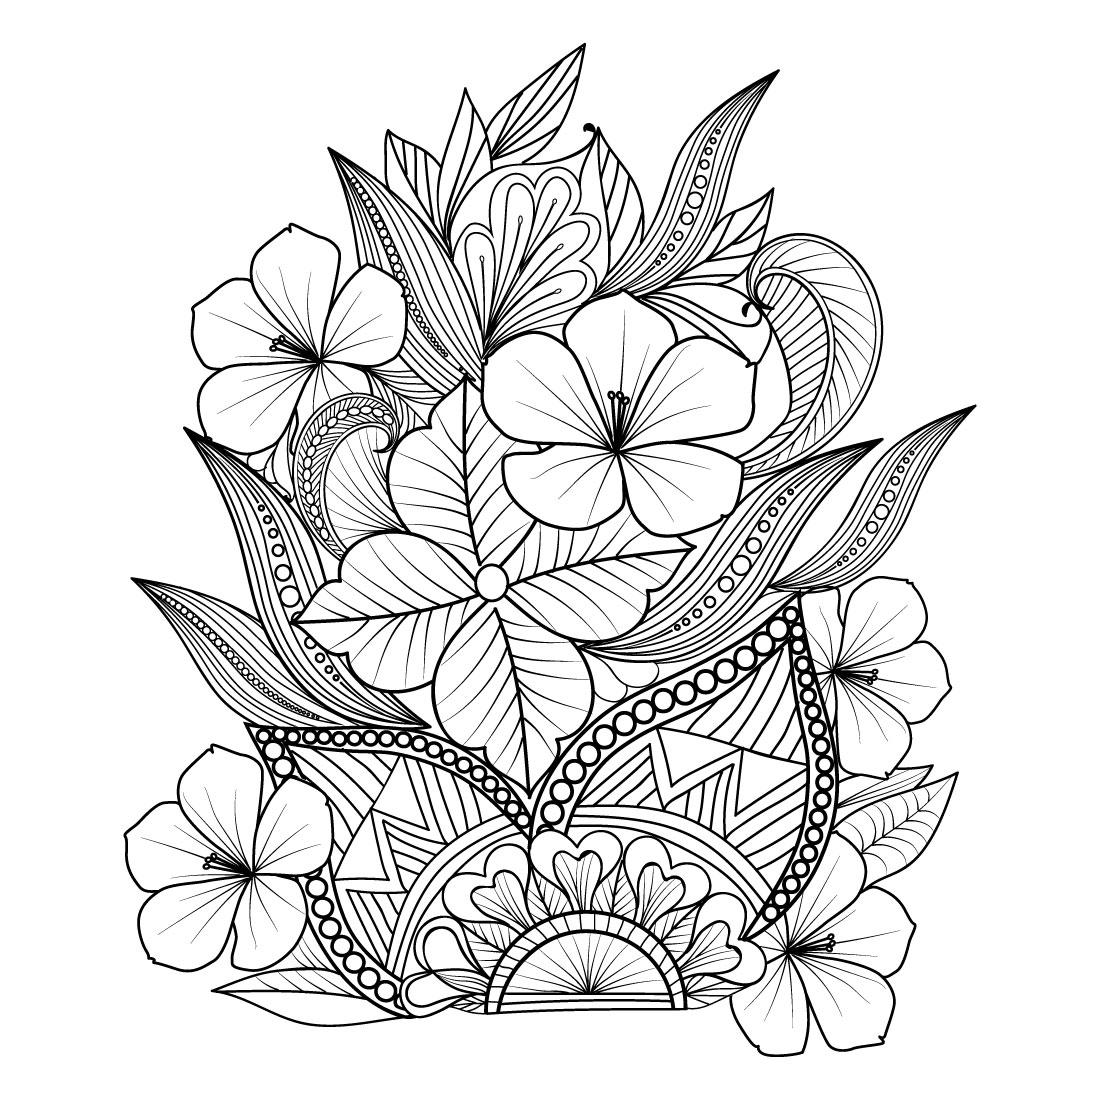 Doodle flower bouquet of line art, lovely design Easy sketch art of peony flower, line art bouquets of floral hand drawn illustration, doodle zentangle, tattooing drawing coloring page, and book isolated image clip art botanic collection, vector art preview image.